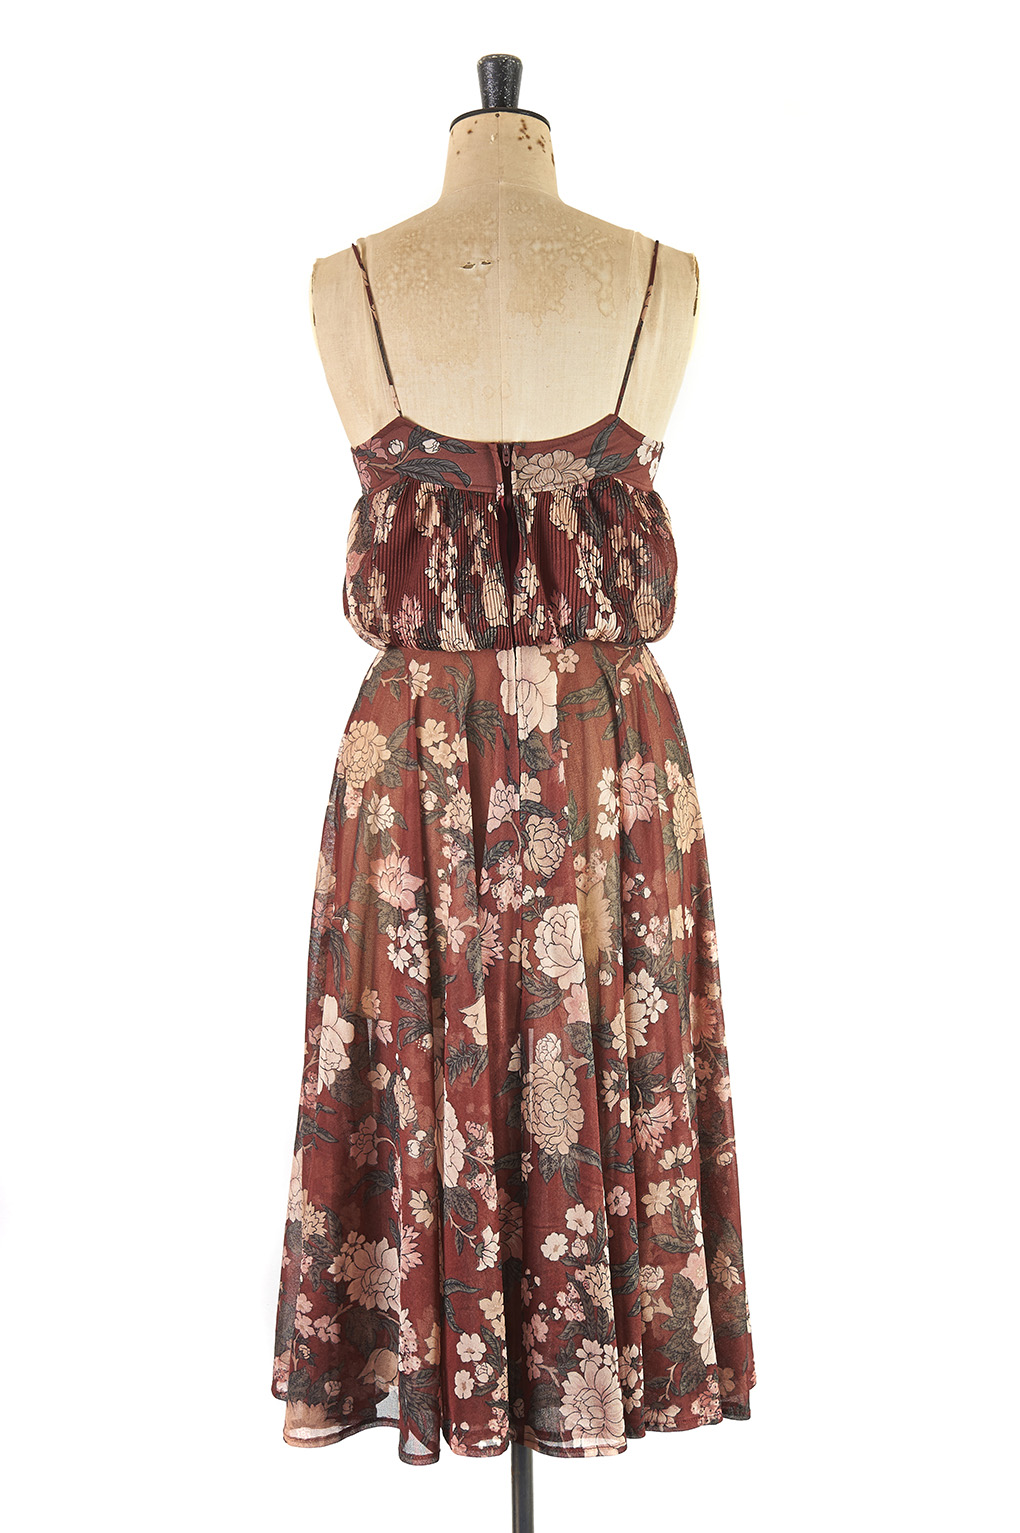 Young Edwardian Dress by Arpeja c.1970